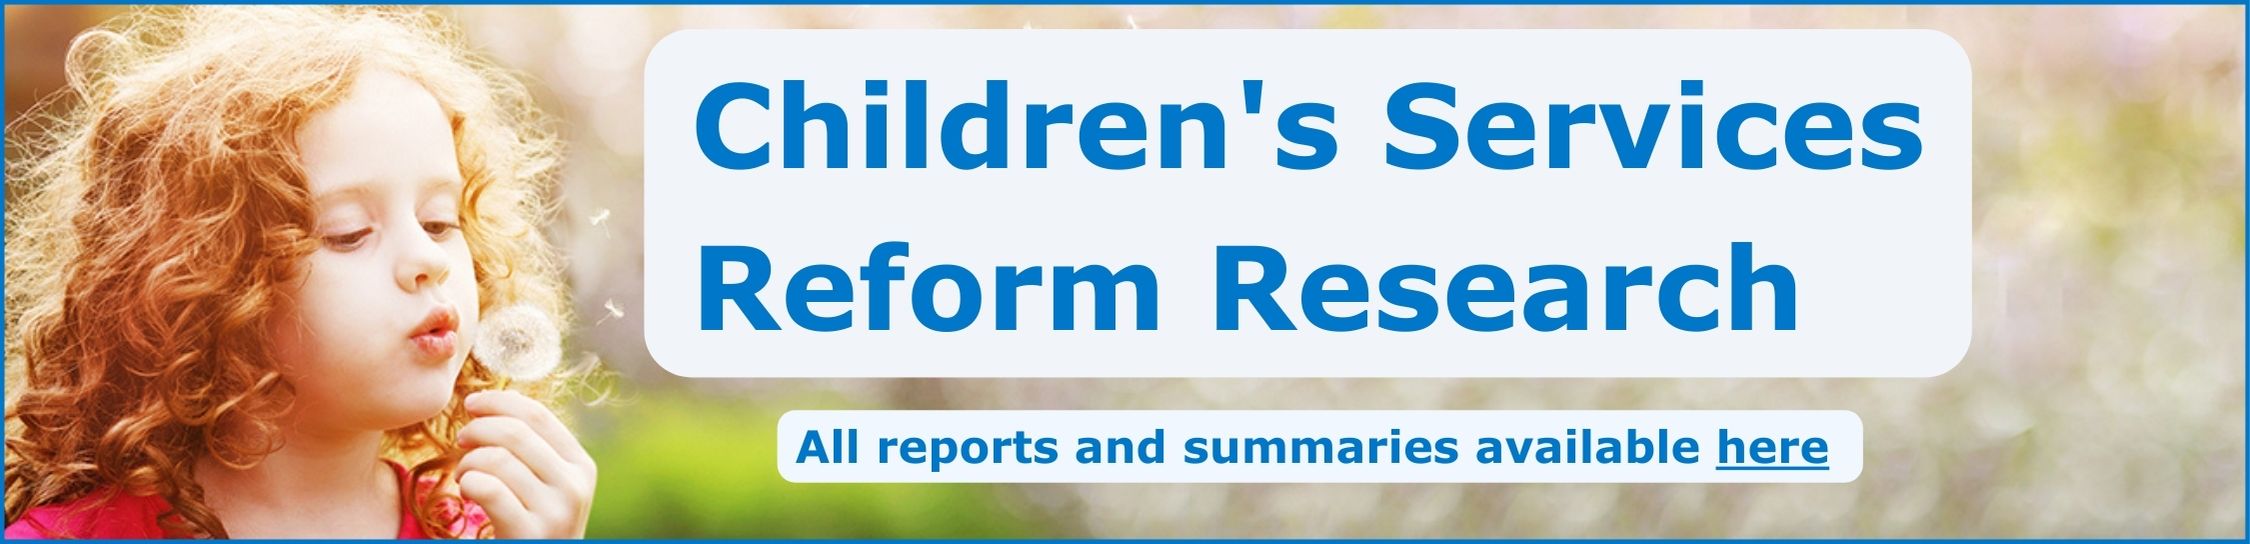 Promoting all the Children's Services Reform Research reports